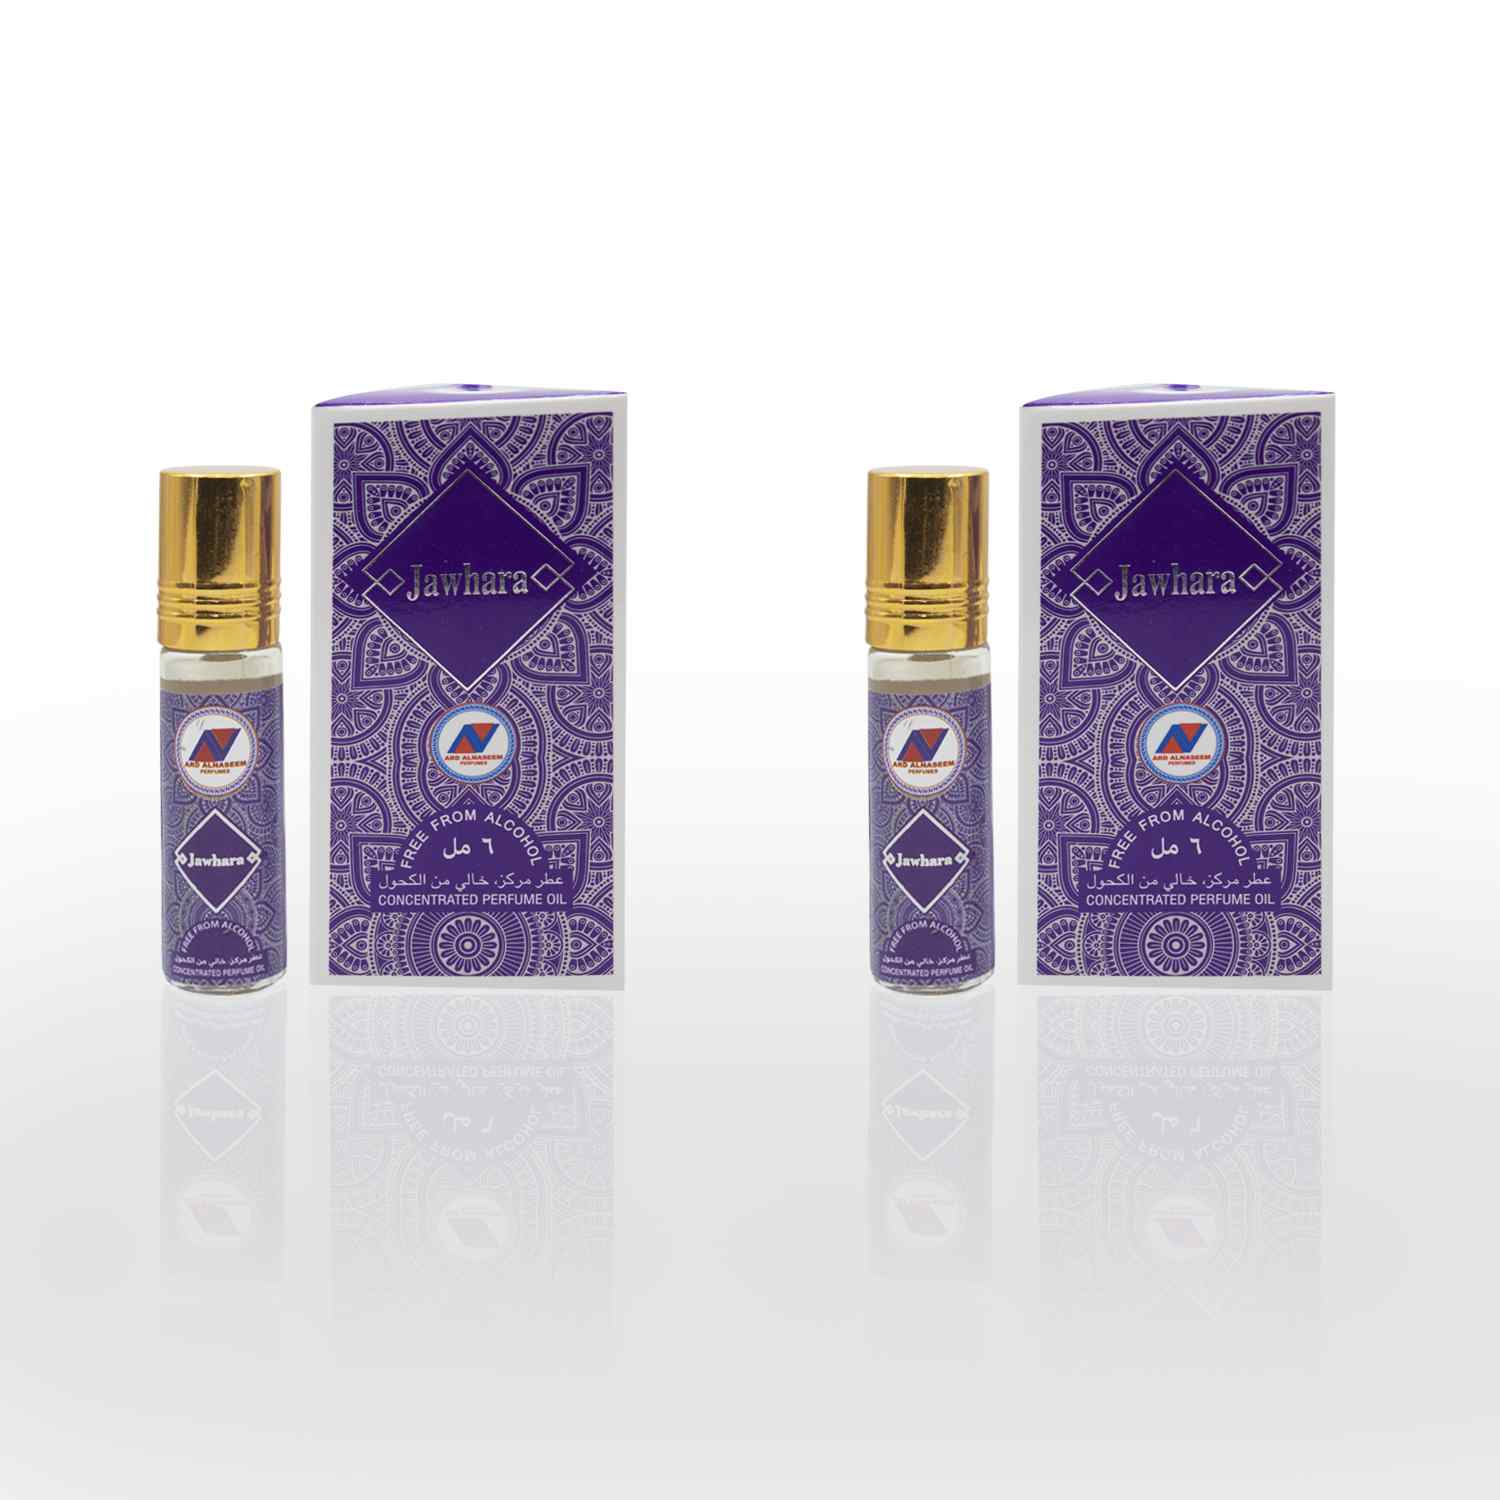 Jawhara concentrated oil attar rollon 6ml by Ard perfumes